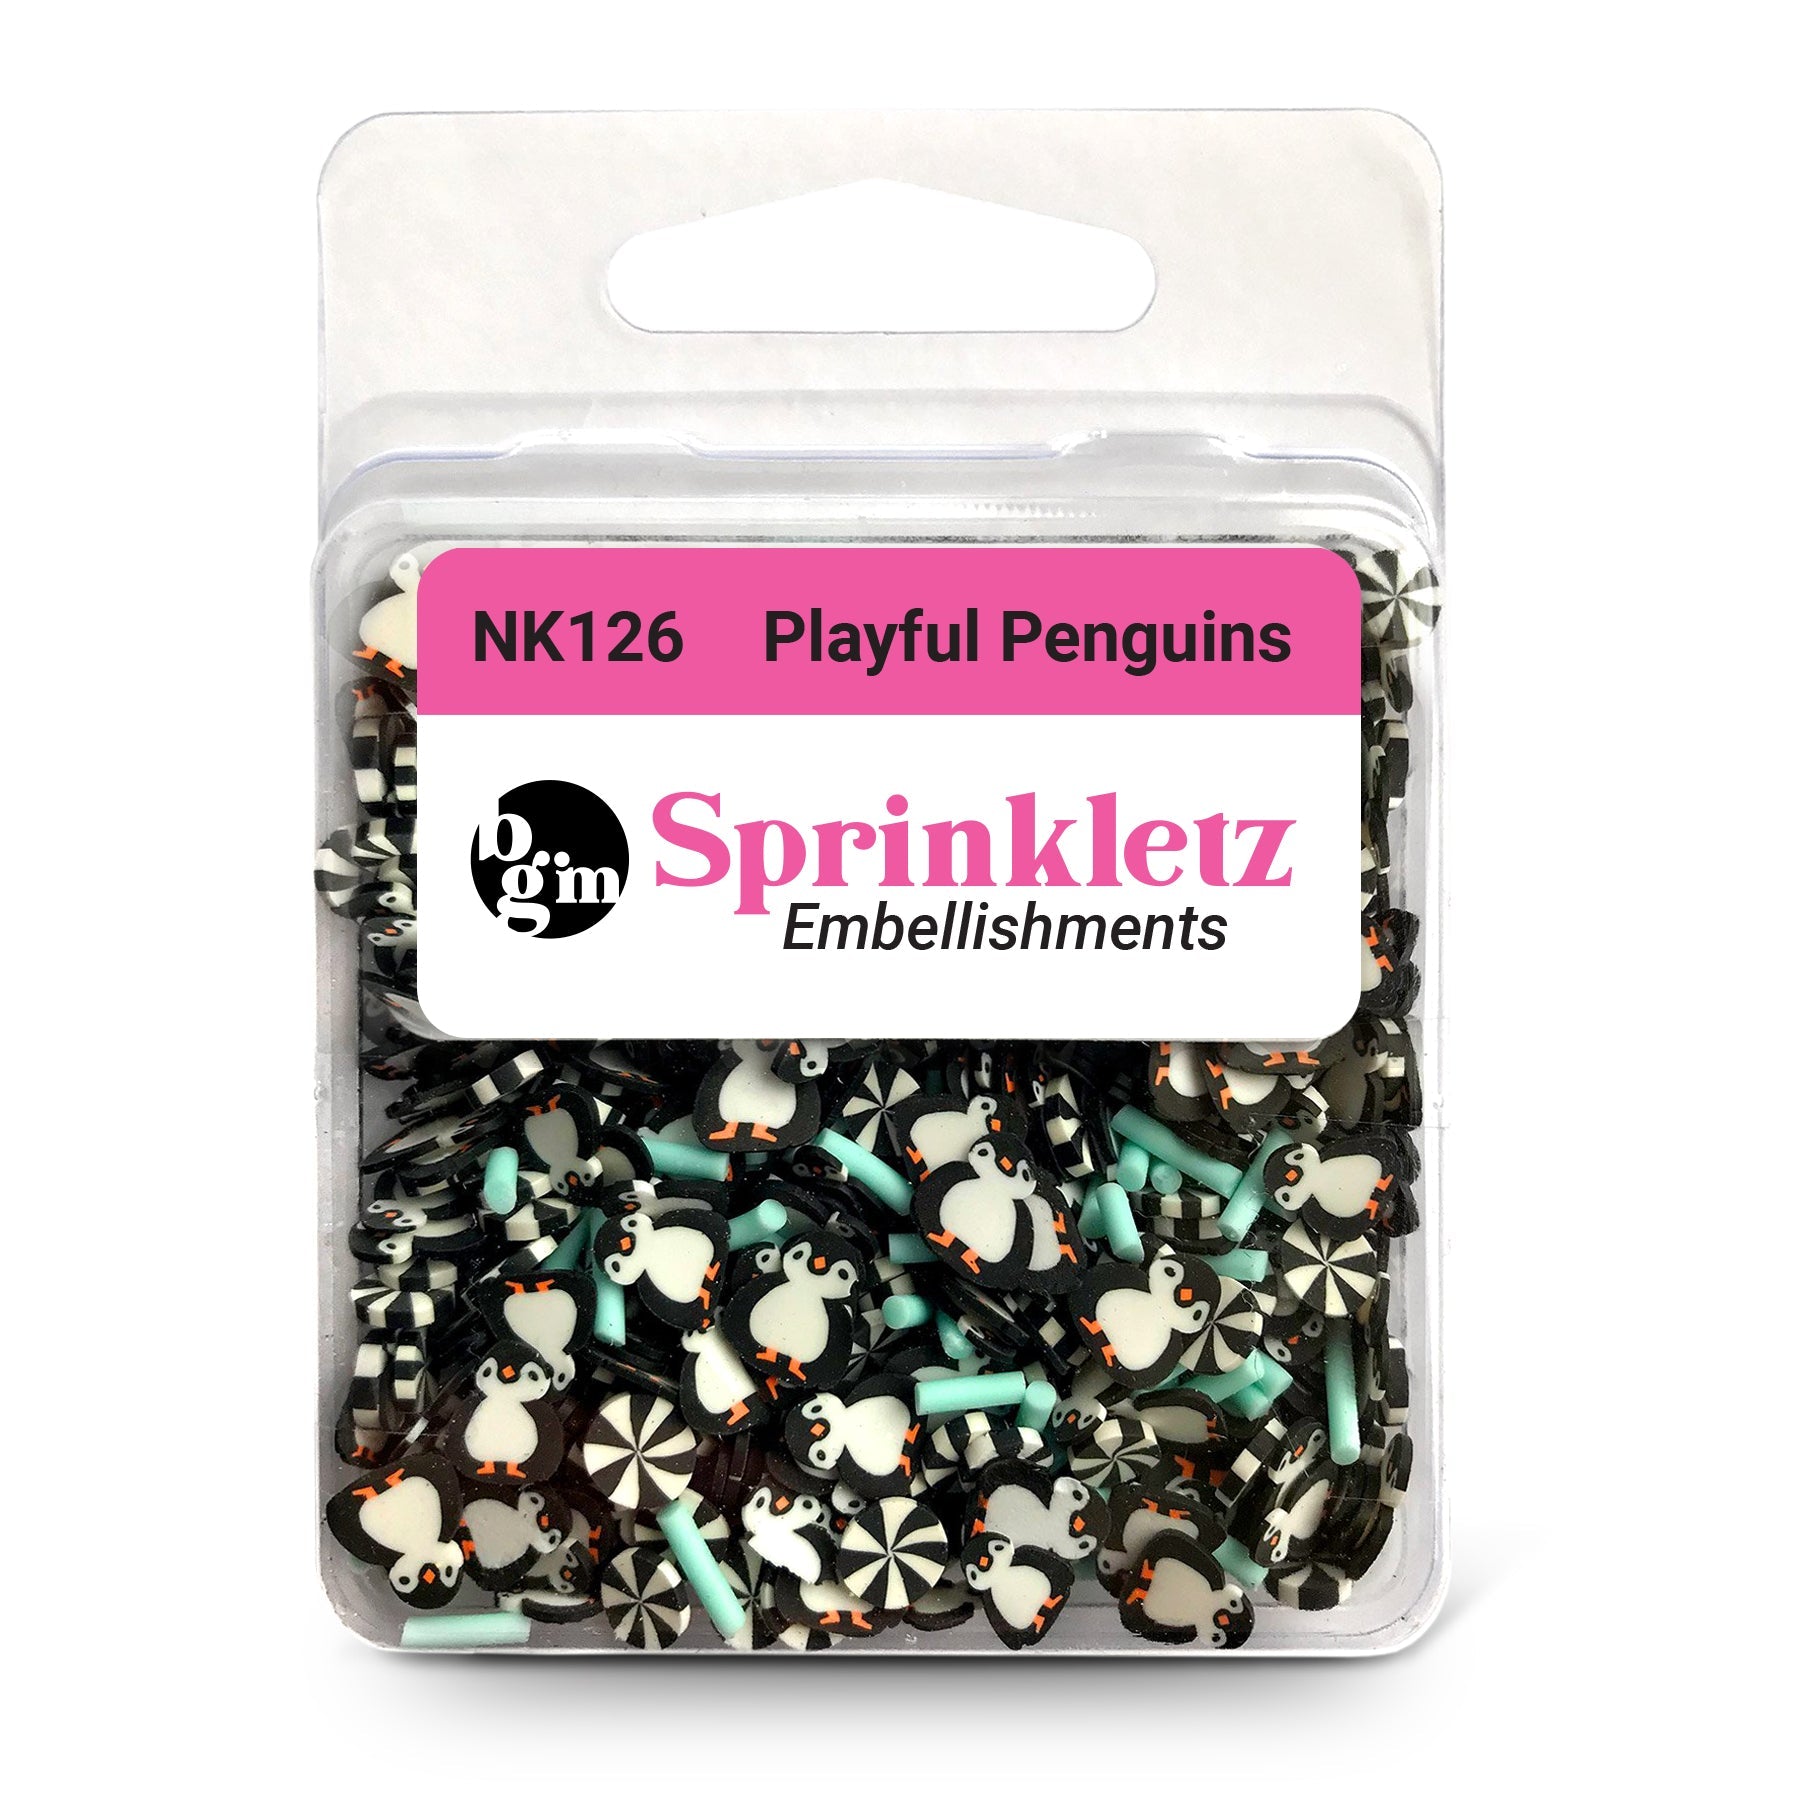 Playful Penguins - Buttons Galore and More